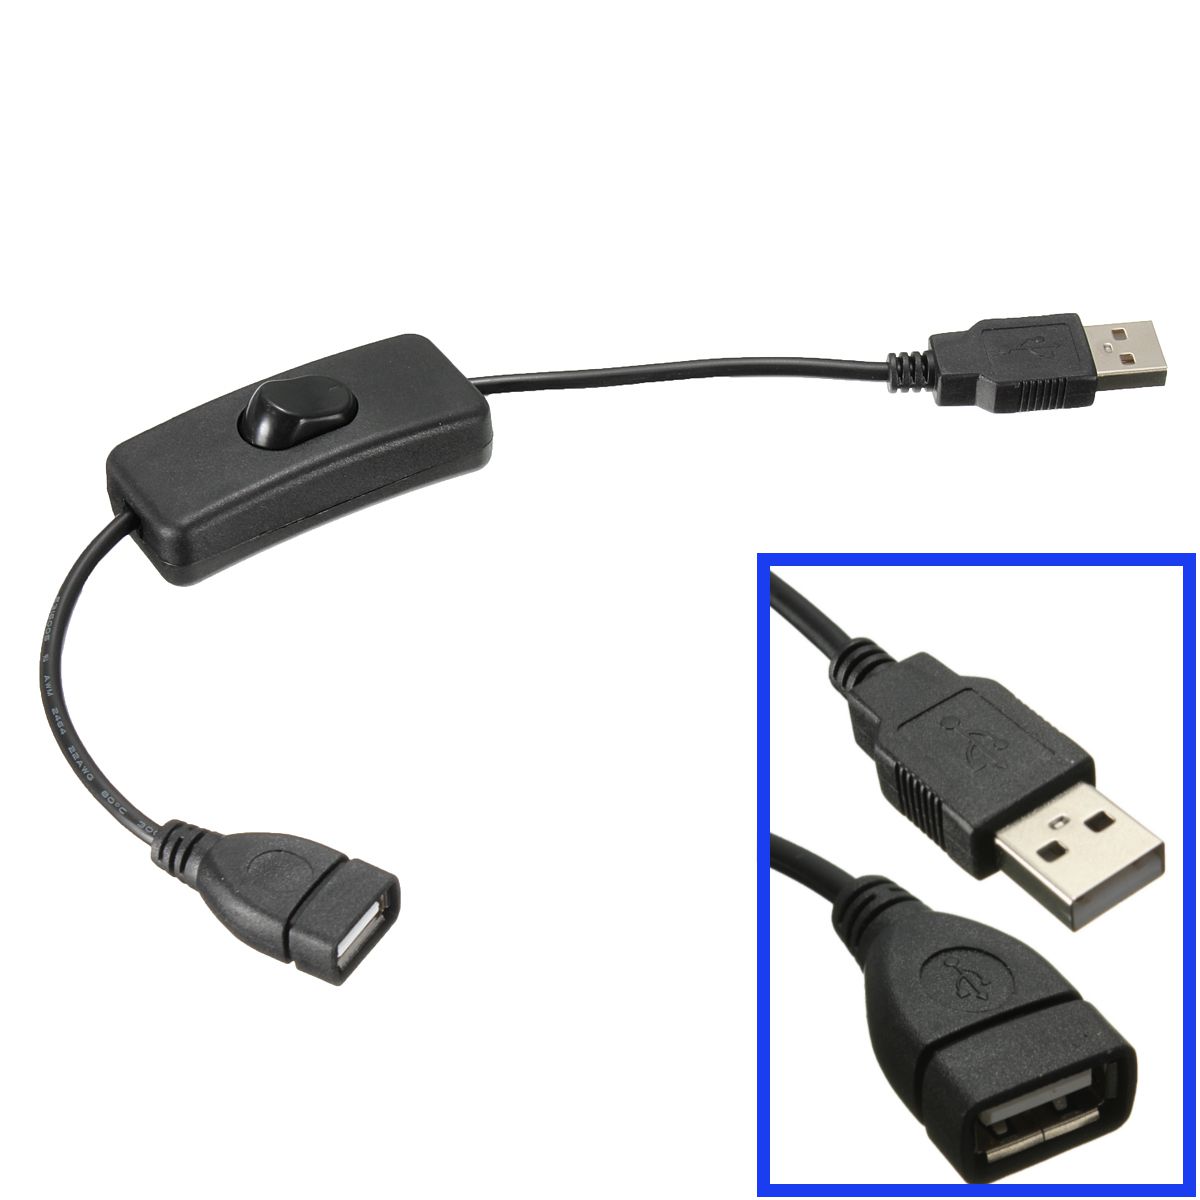 USB-Power-Cable-With-OnOff-Switch-For-Raspberry-Pi-972492